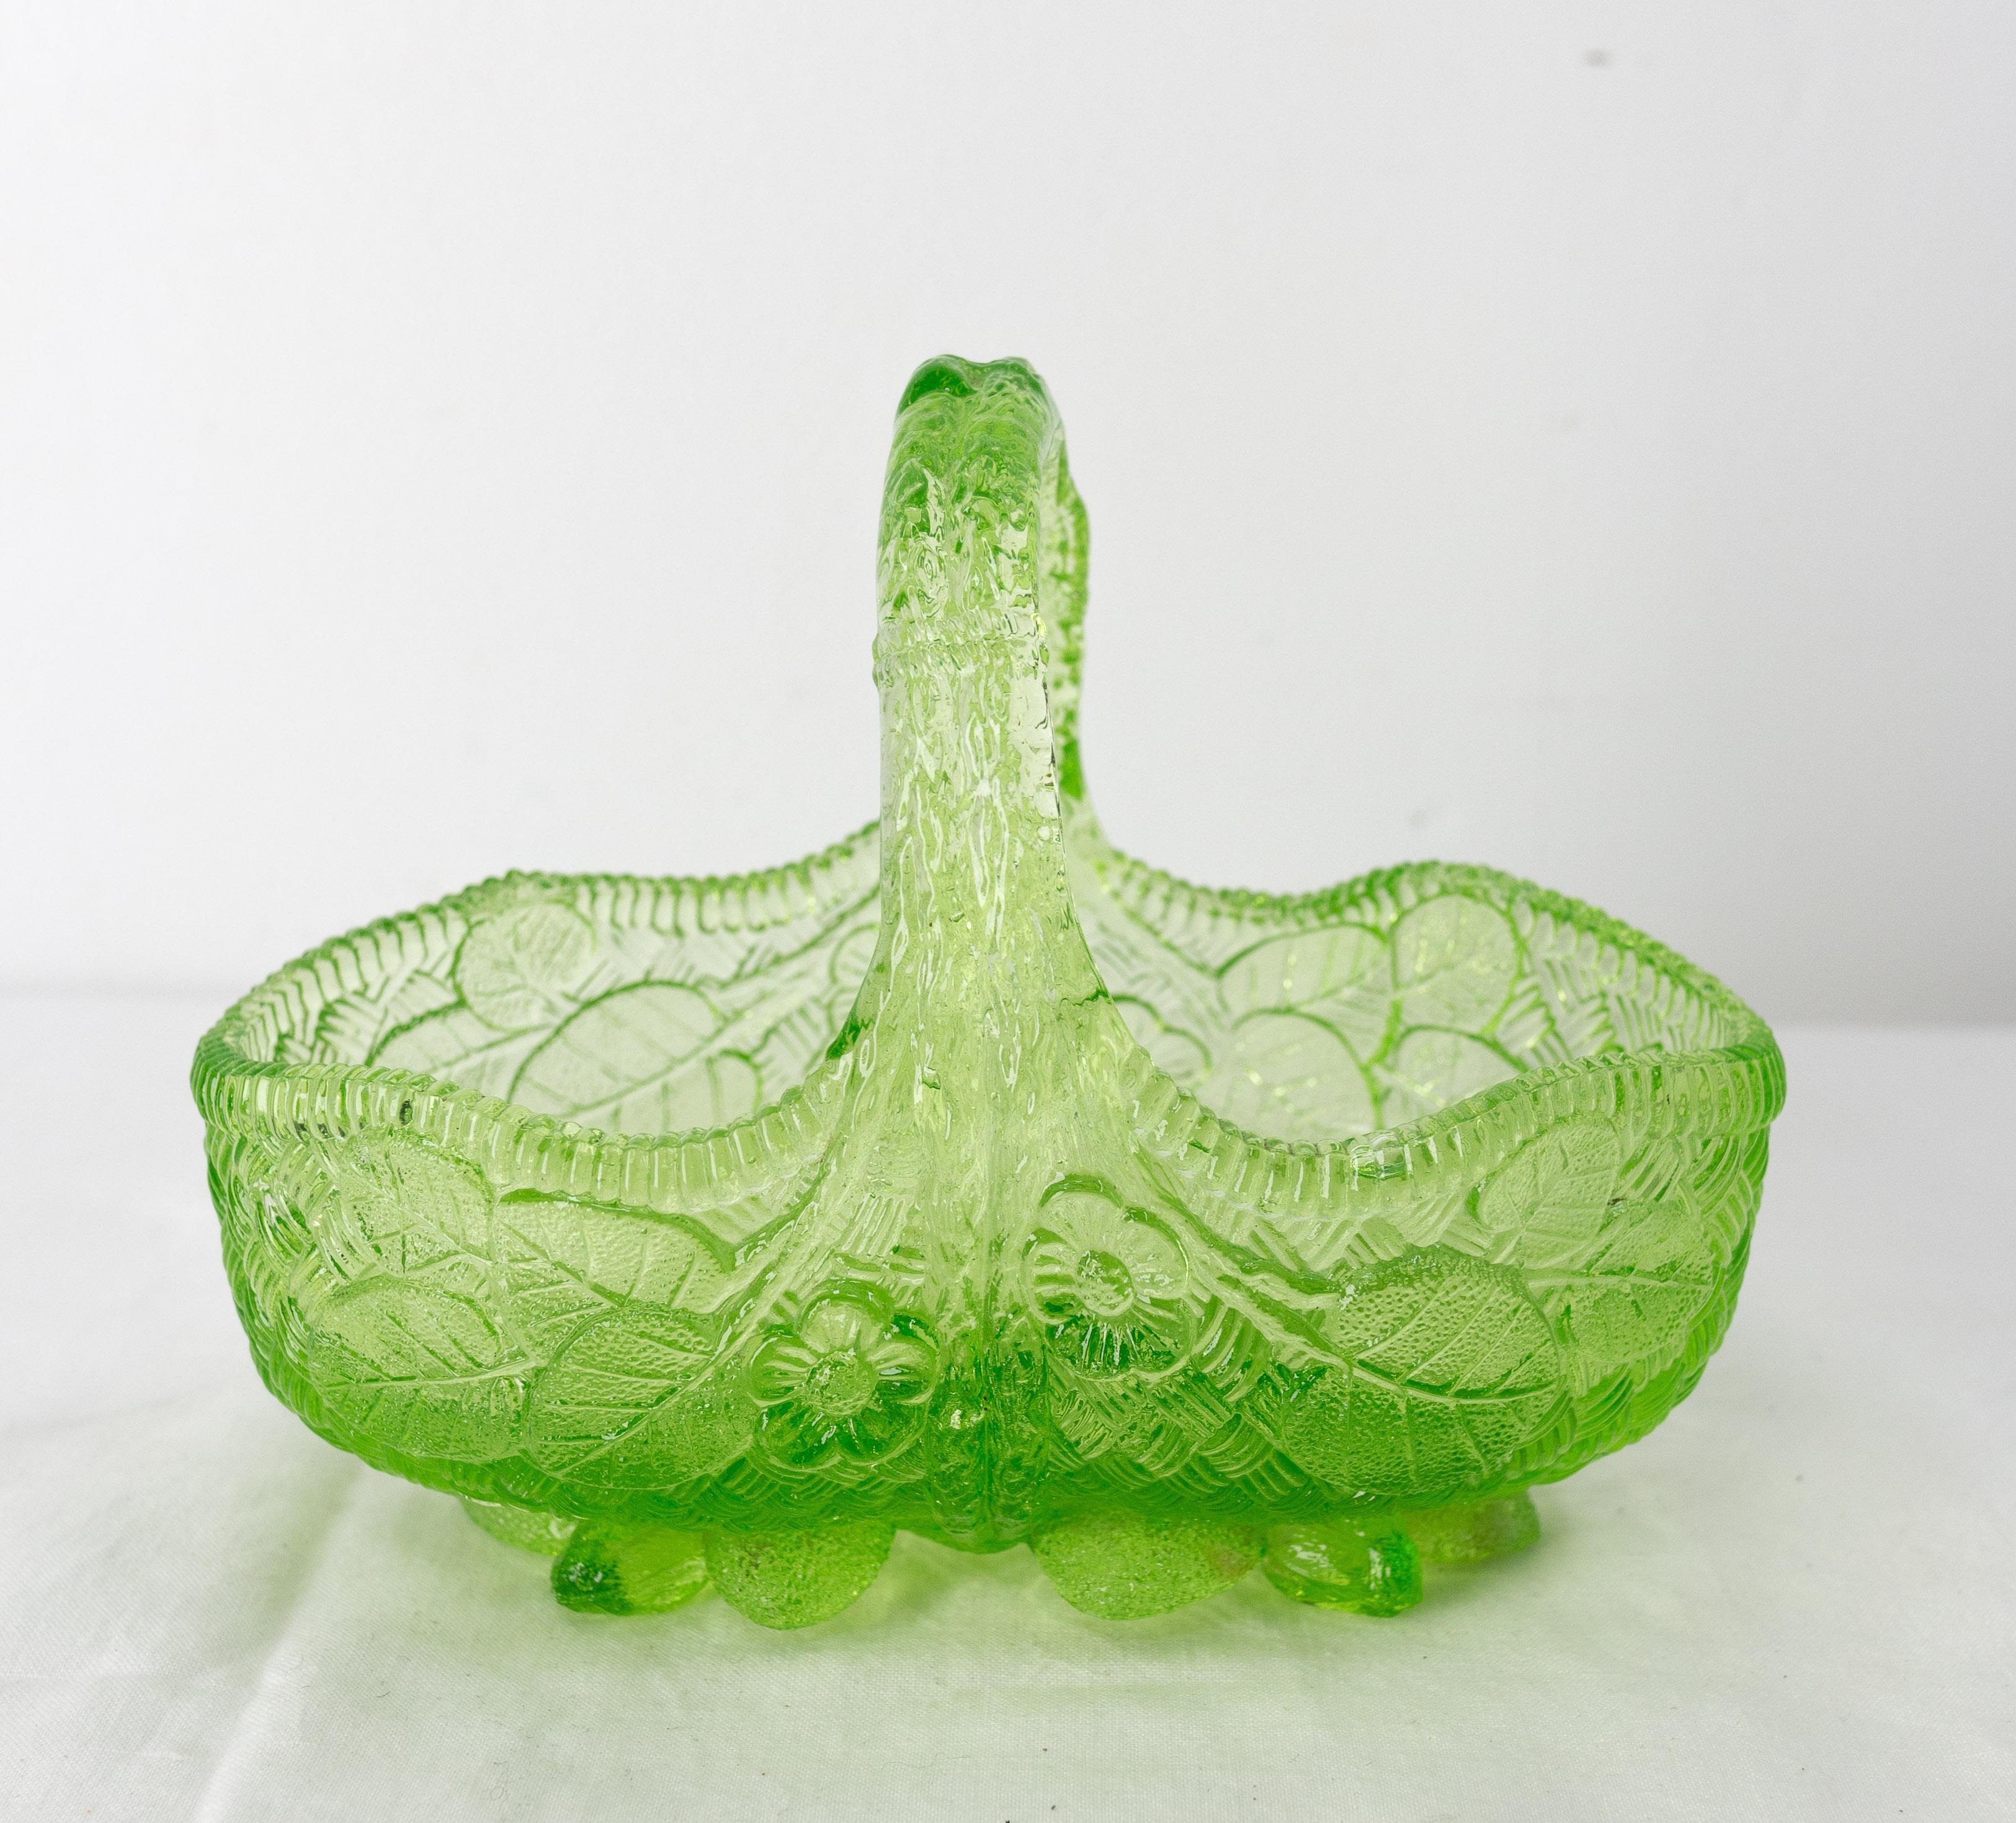 French green molded glass basket, to be used as a center piece or empty pocket.
Decorated with vegetal and floral motifs on imitation wickerwork.

Good condition

Shipping:
10 / 17 / 14 cm 0.8 kg.